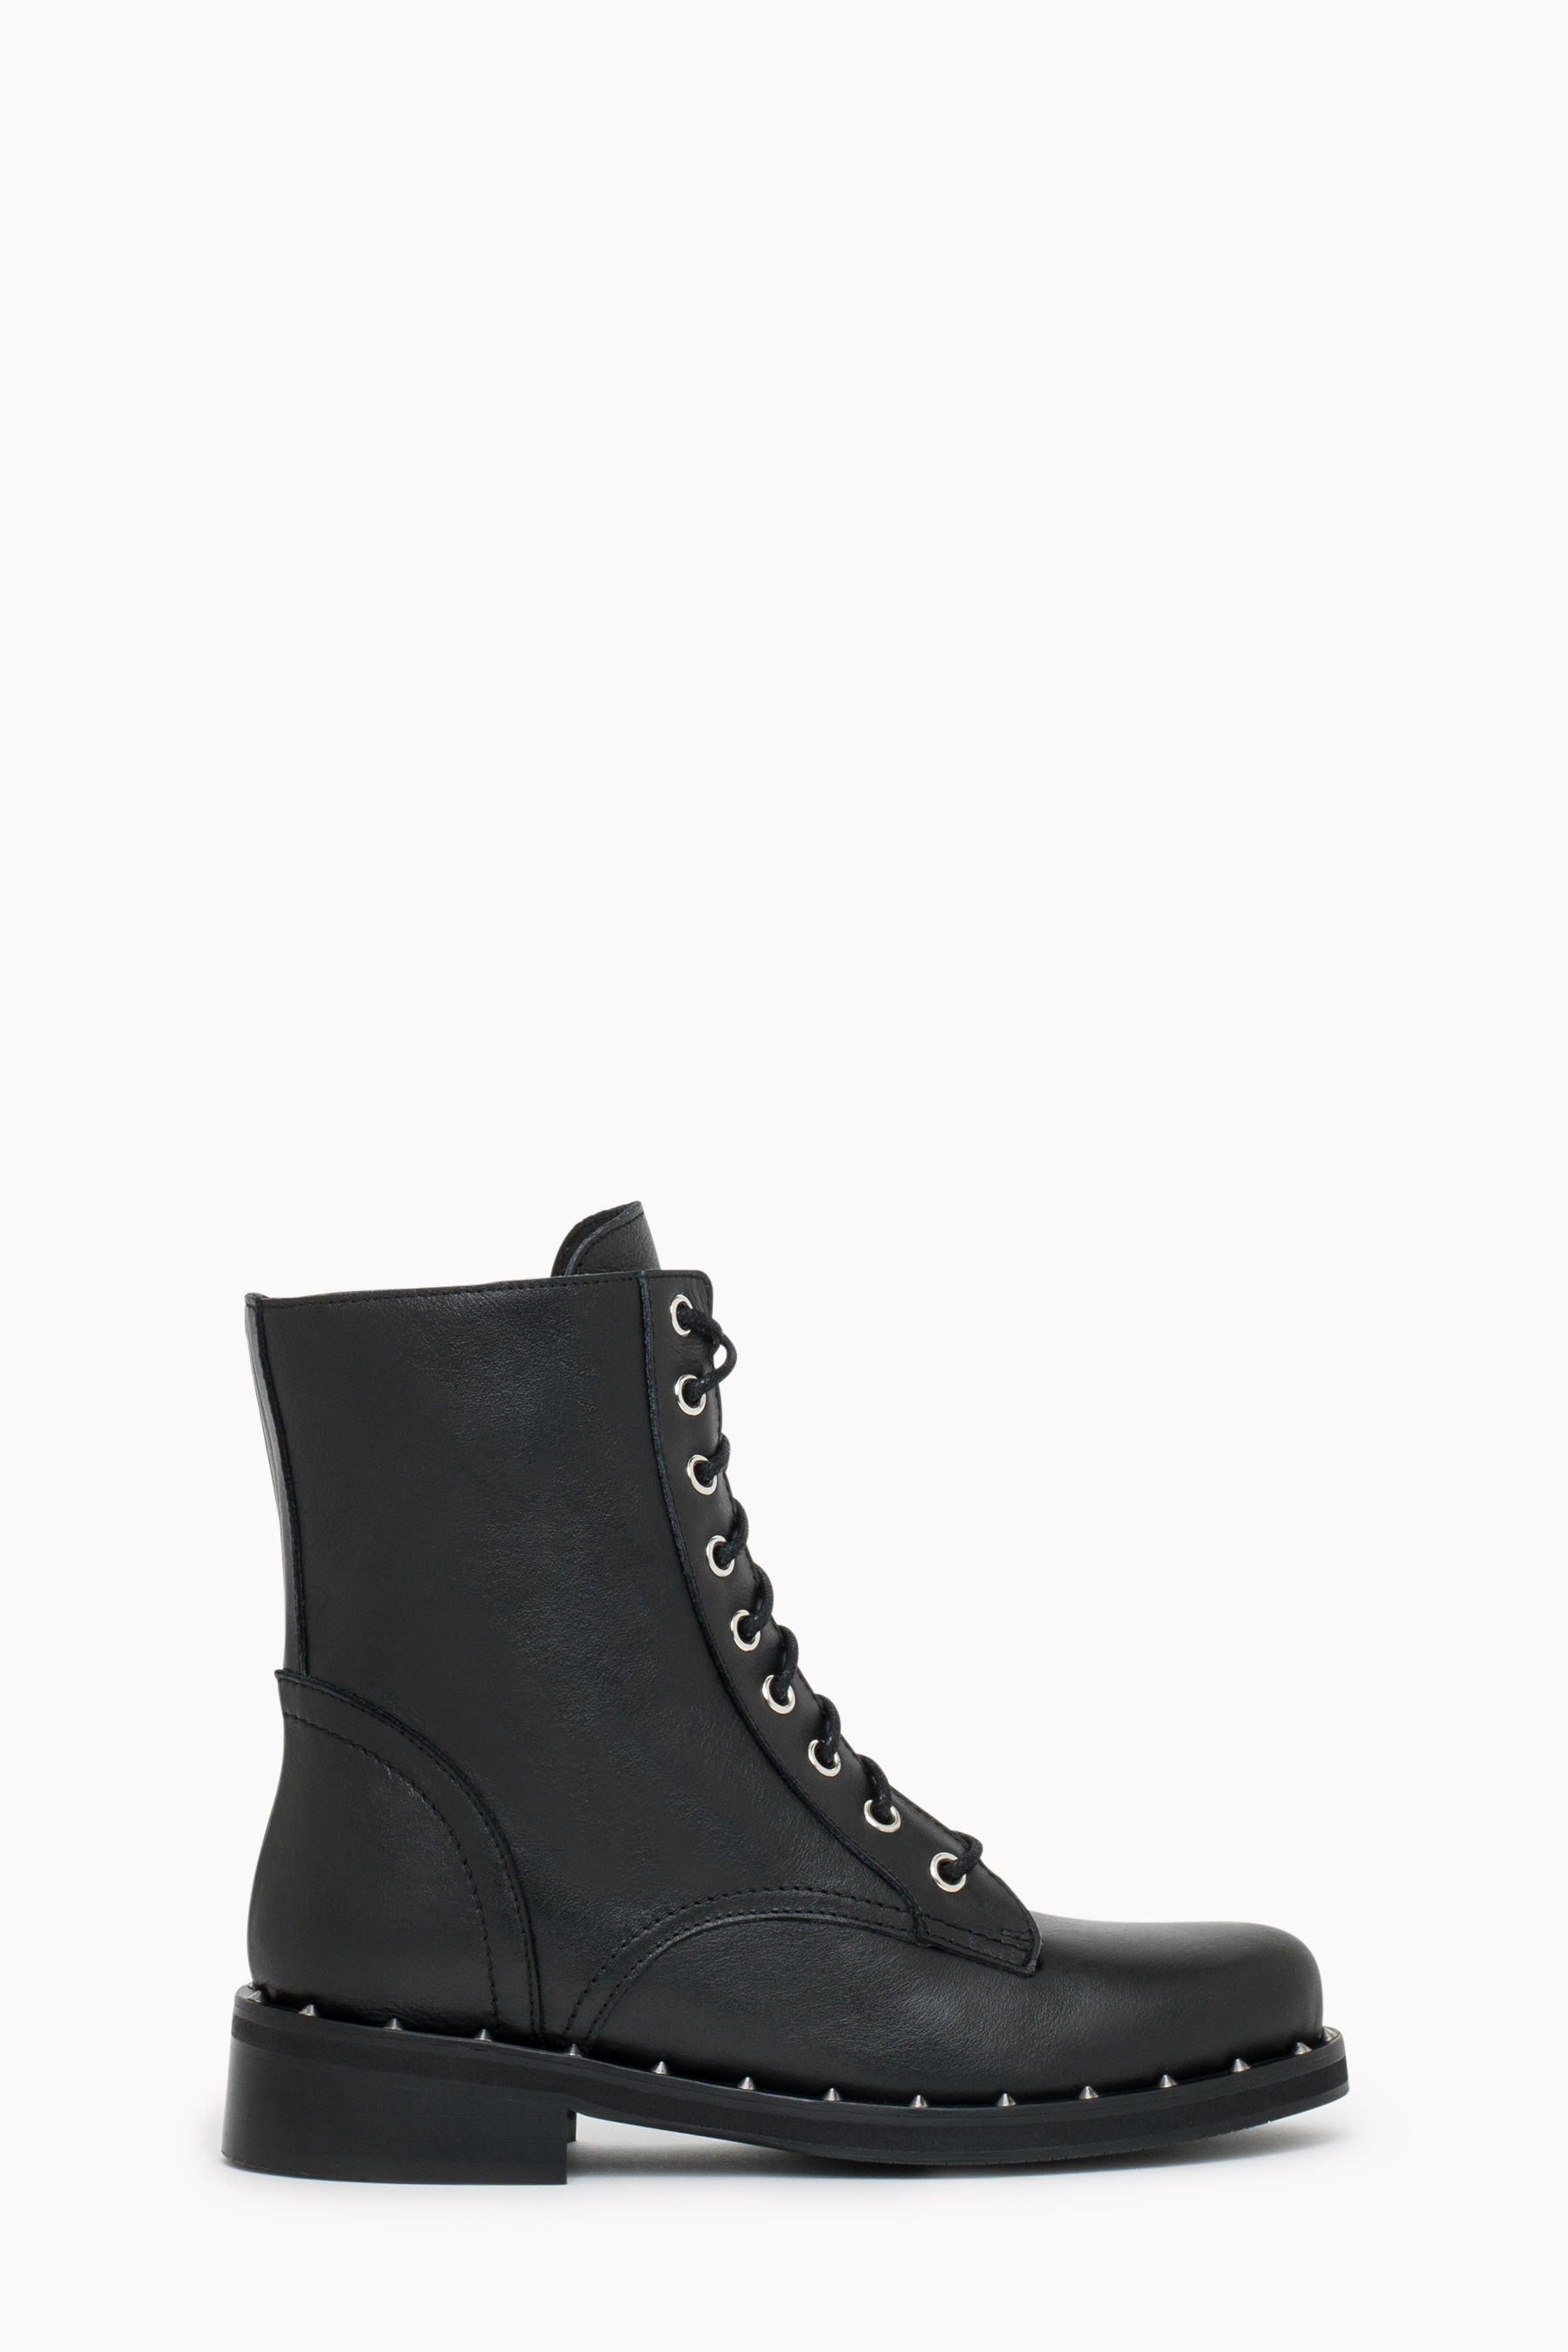 leather lace up biker boots